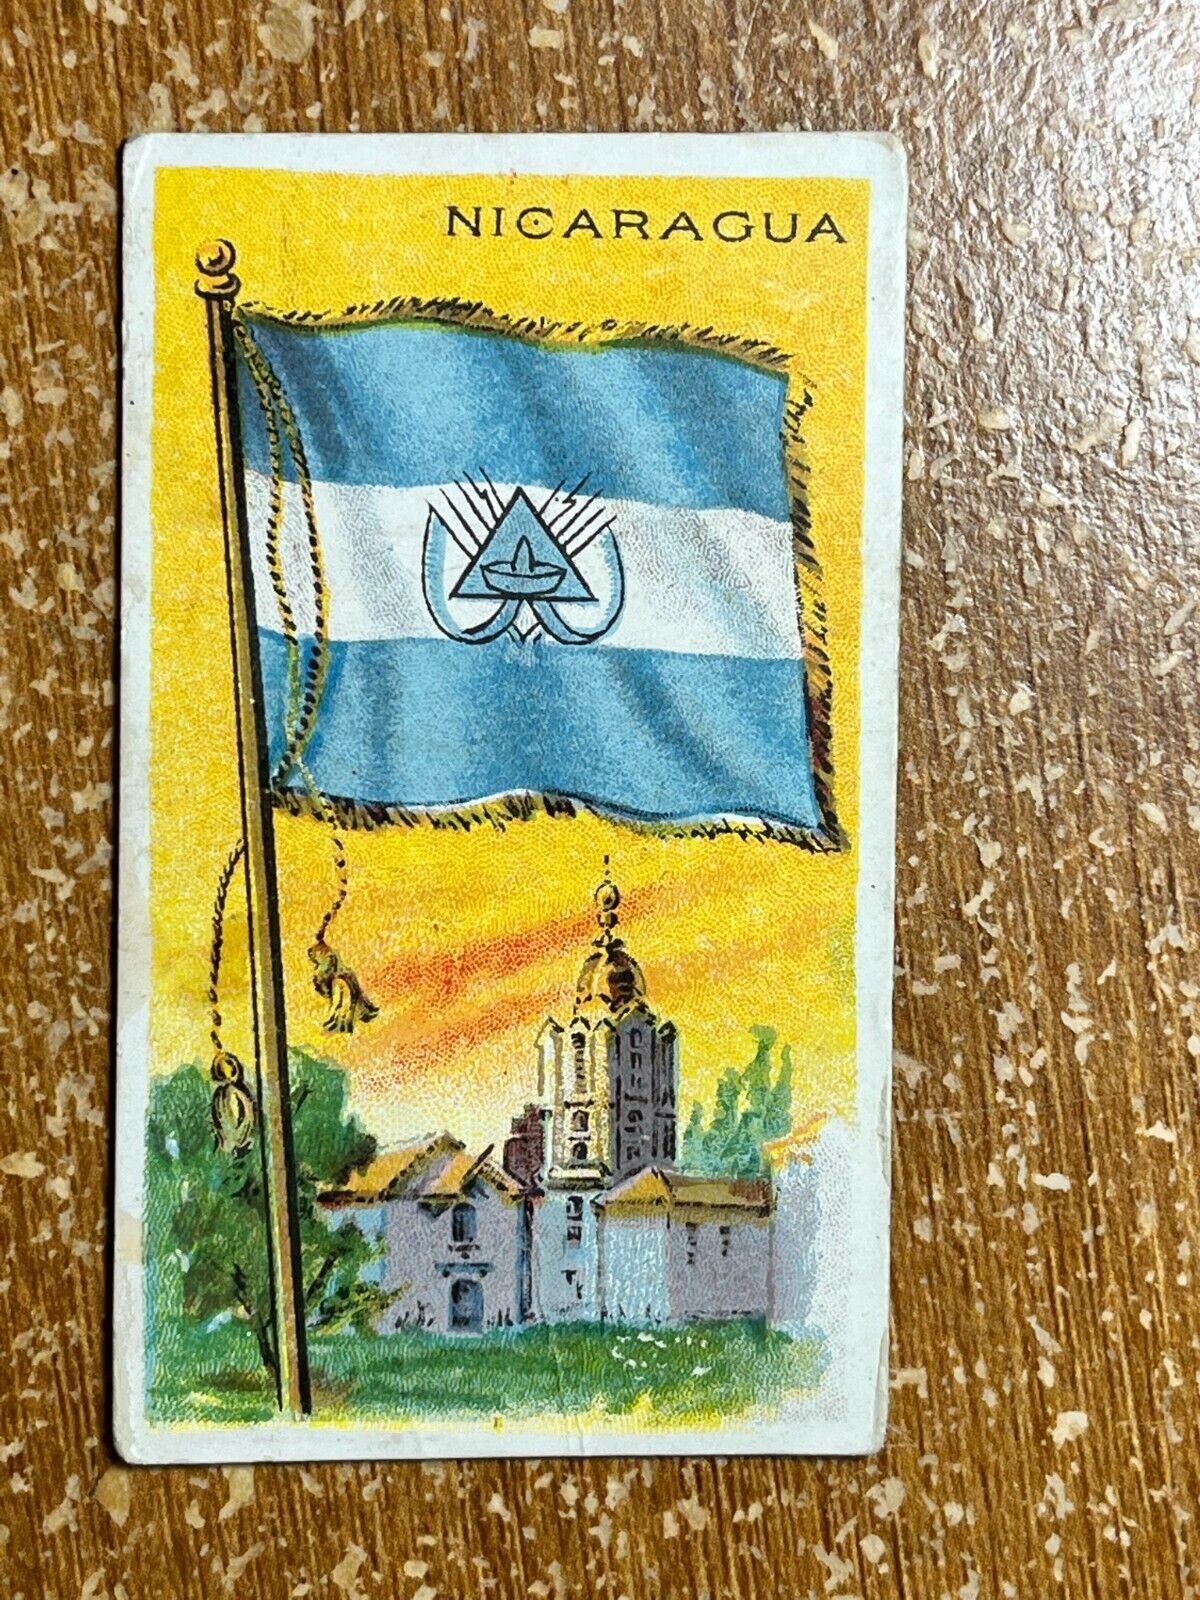 1910-11 Flags of Nations Tobacco T59 Nicaragua Jack Rose